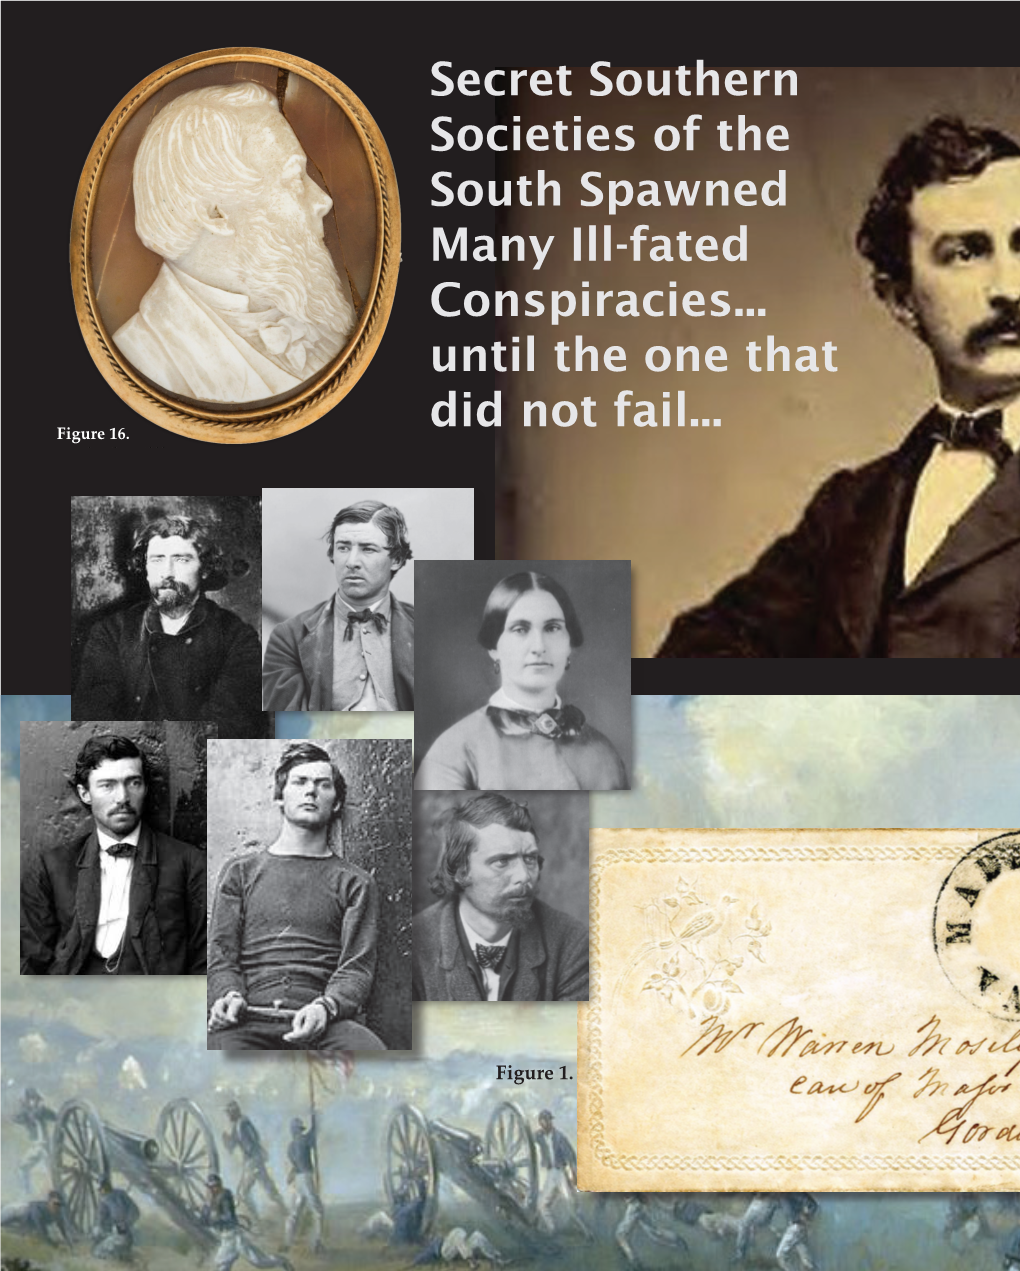 Secret Southern Societies of the South Spawned Many Ill-Fated Conspiracies